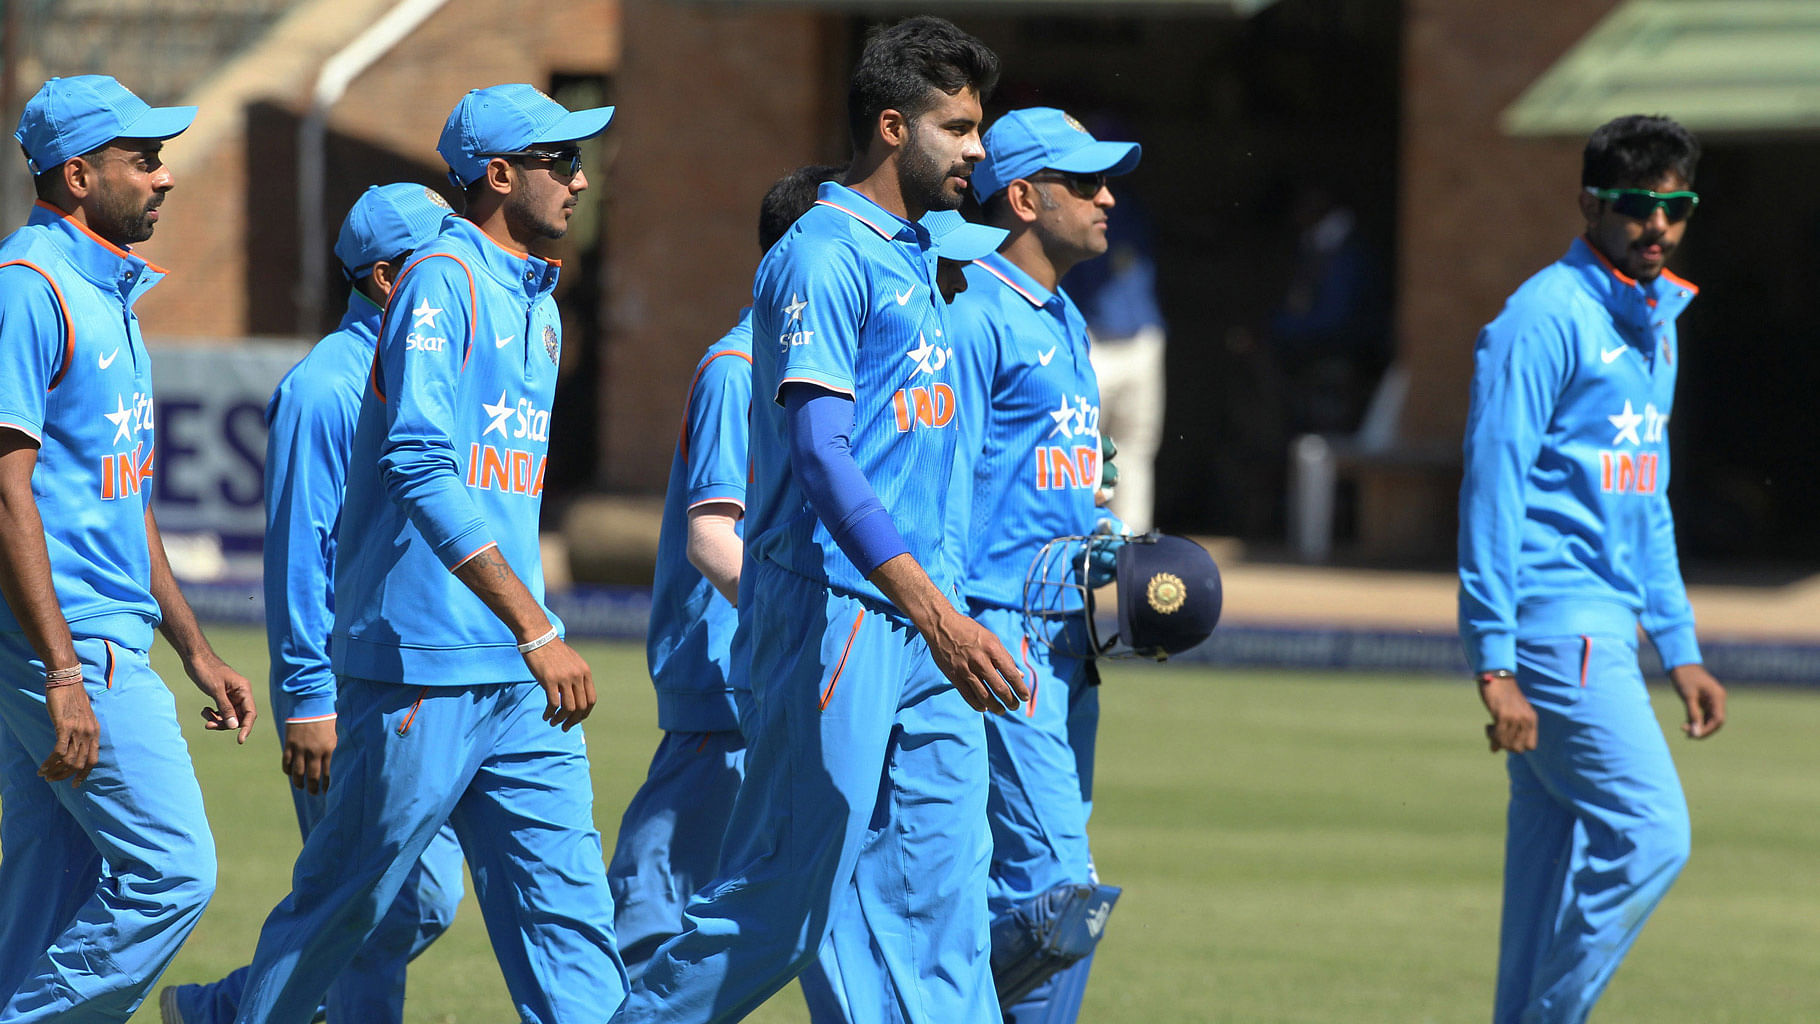 The Indian cricket team leaving the pitch after the end of their innings in the India-Zimbabwe ODI. (Photo: AP)